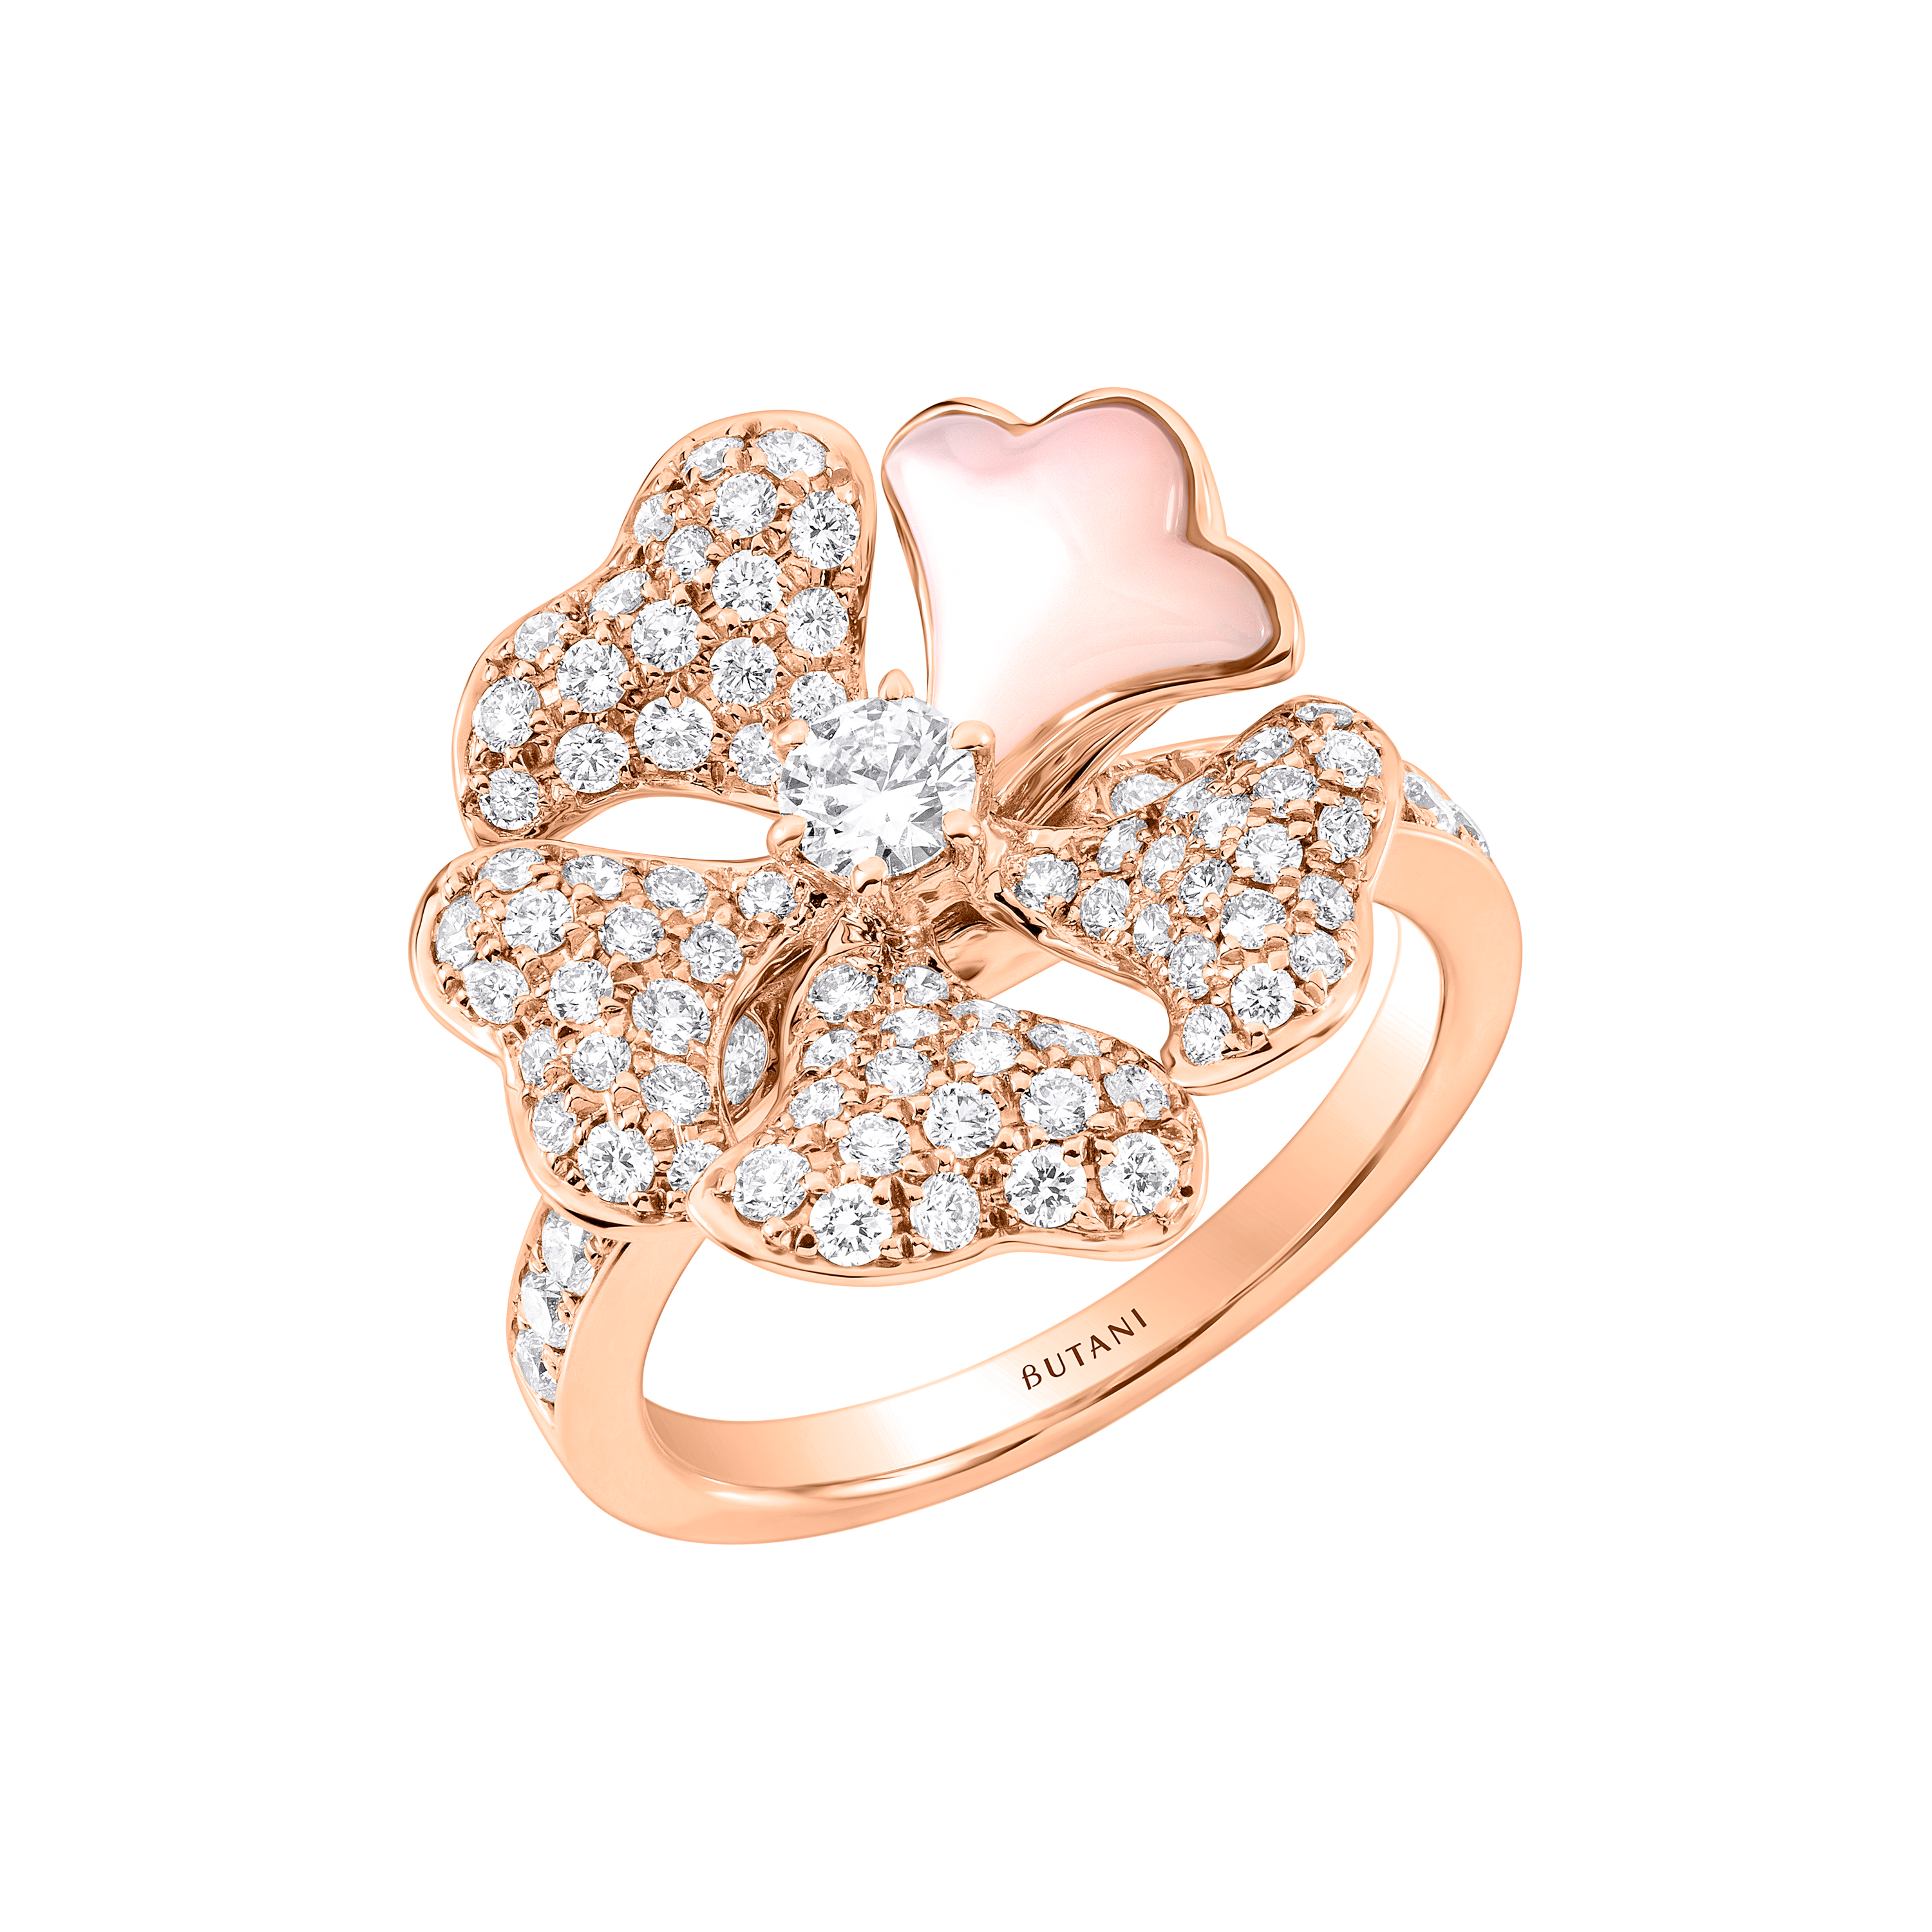 Bloom Pink Mother-of-Pearl and Pavé Diamond Ring In 18K Rose Gold